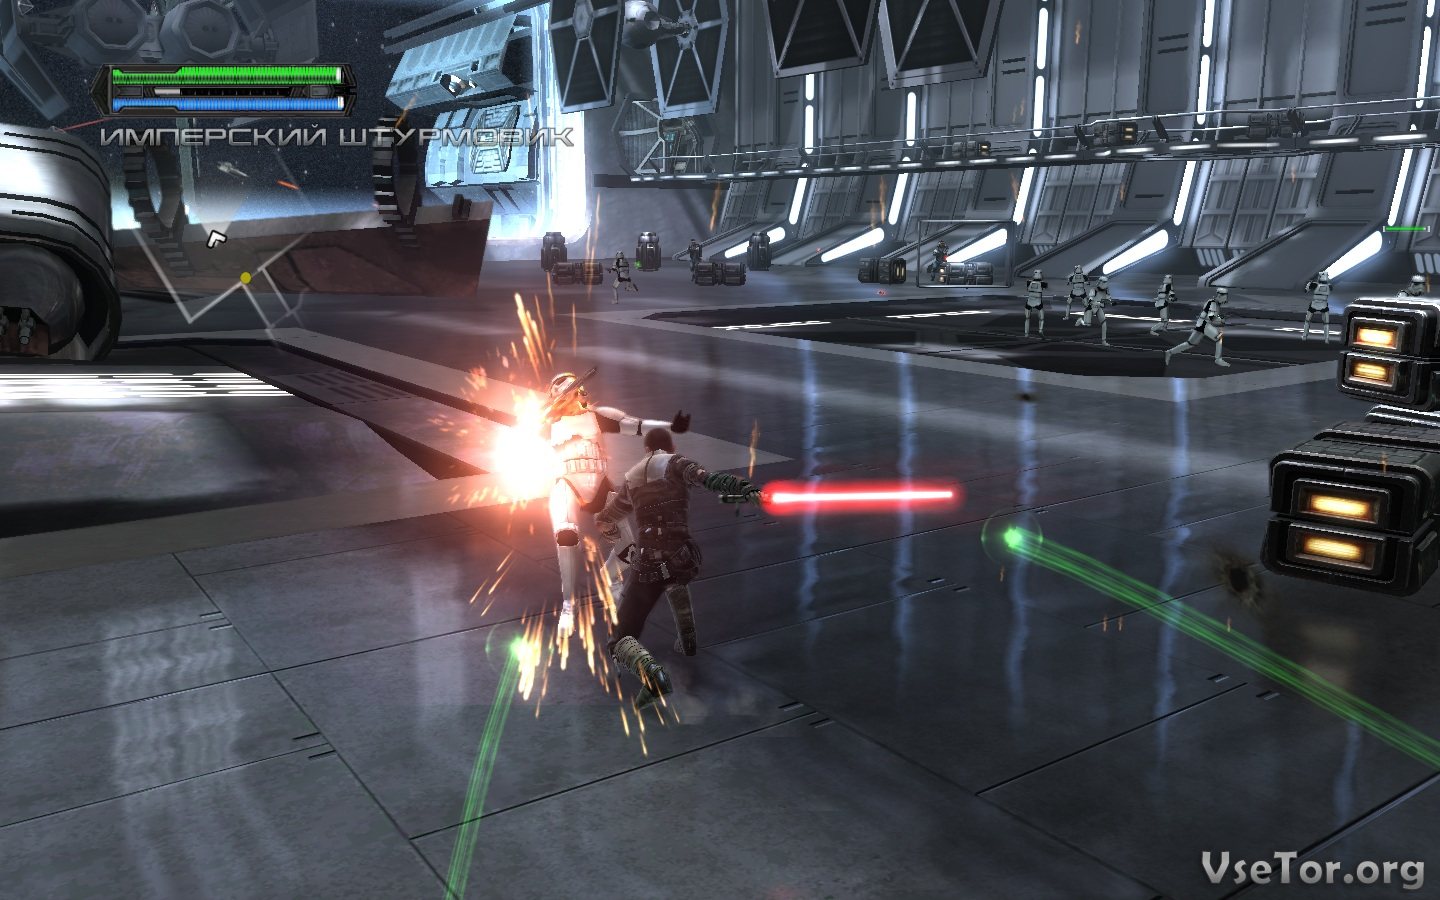 Игра star wars the force unleashed. Star Wars the Force unleashed Ultimate Sith Edition (2009). Star Wars the Force unleashed 1. Star Wars: the Force unleashed - Ultimate Sith Edition. Star Wars: the Force unleashed 1/2.